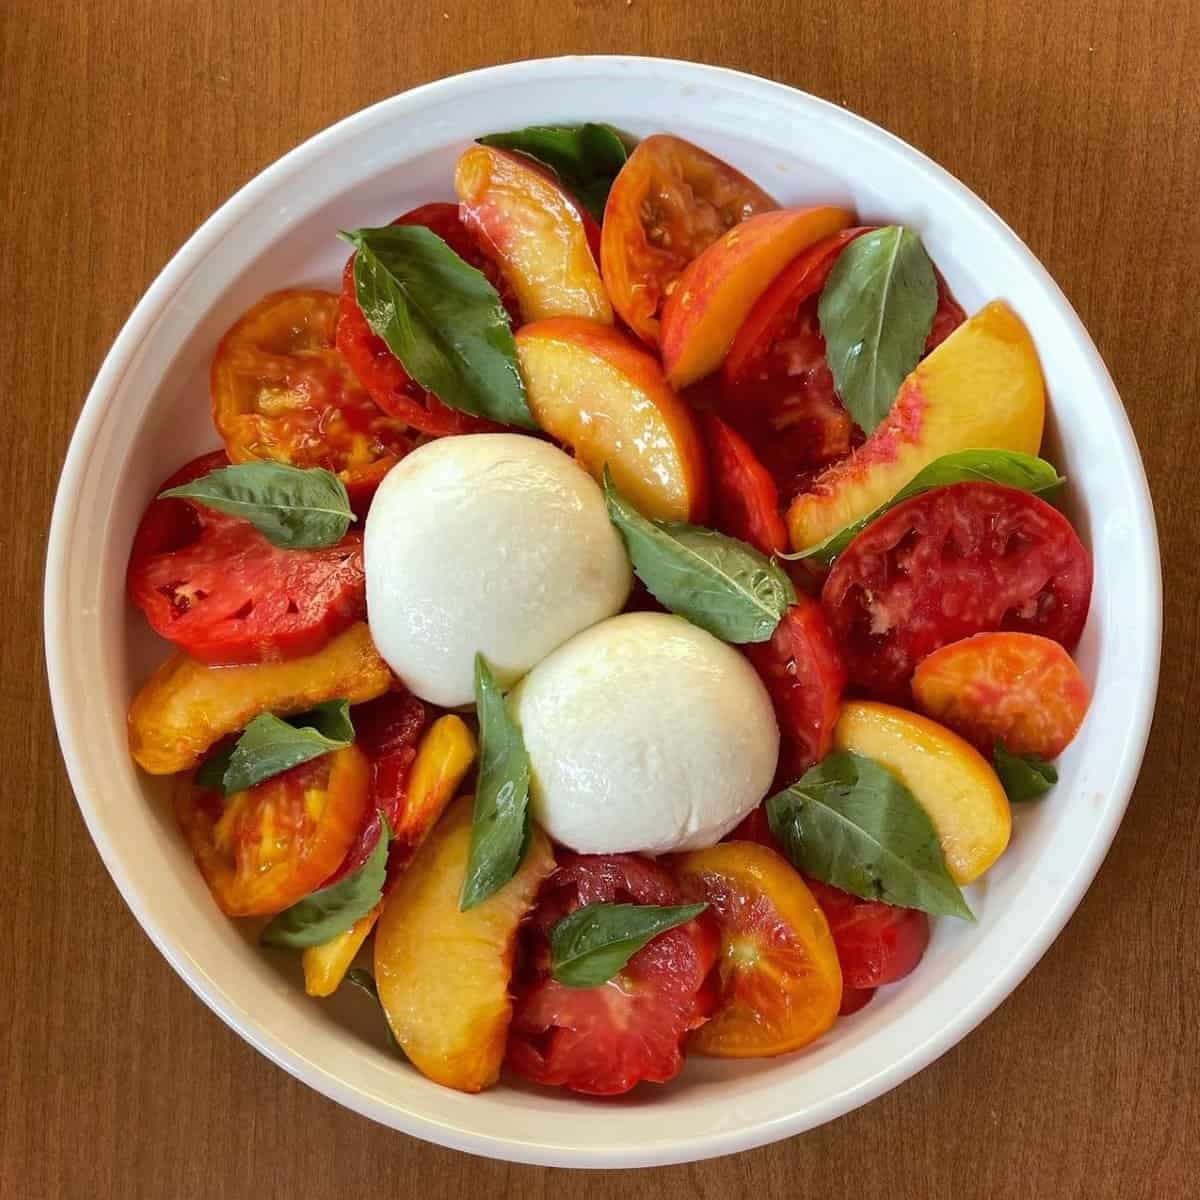 a peach and burrata caprese salad from above with sliced peaches, two different sliced tomatoes, whole basil leaves, and two balls of burrata.